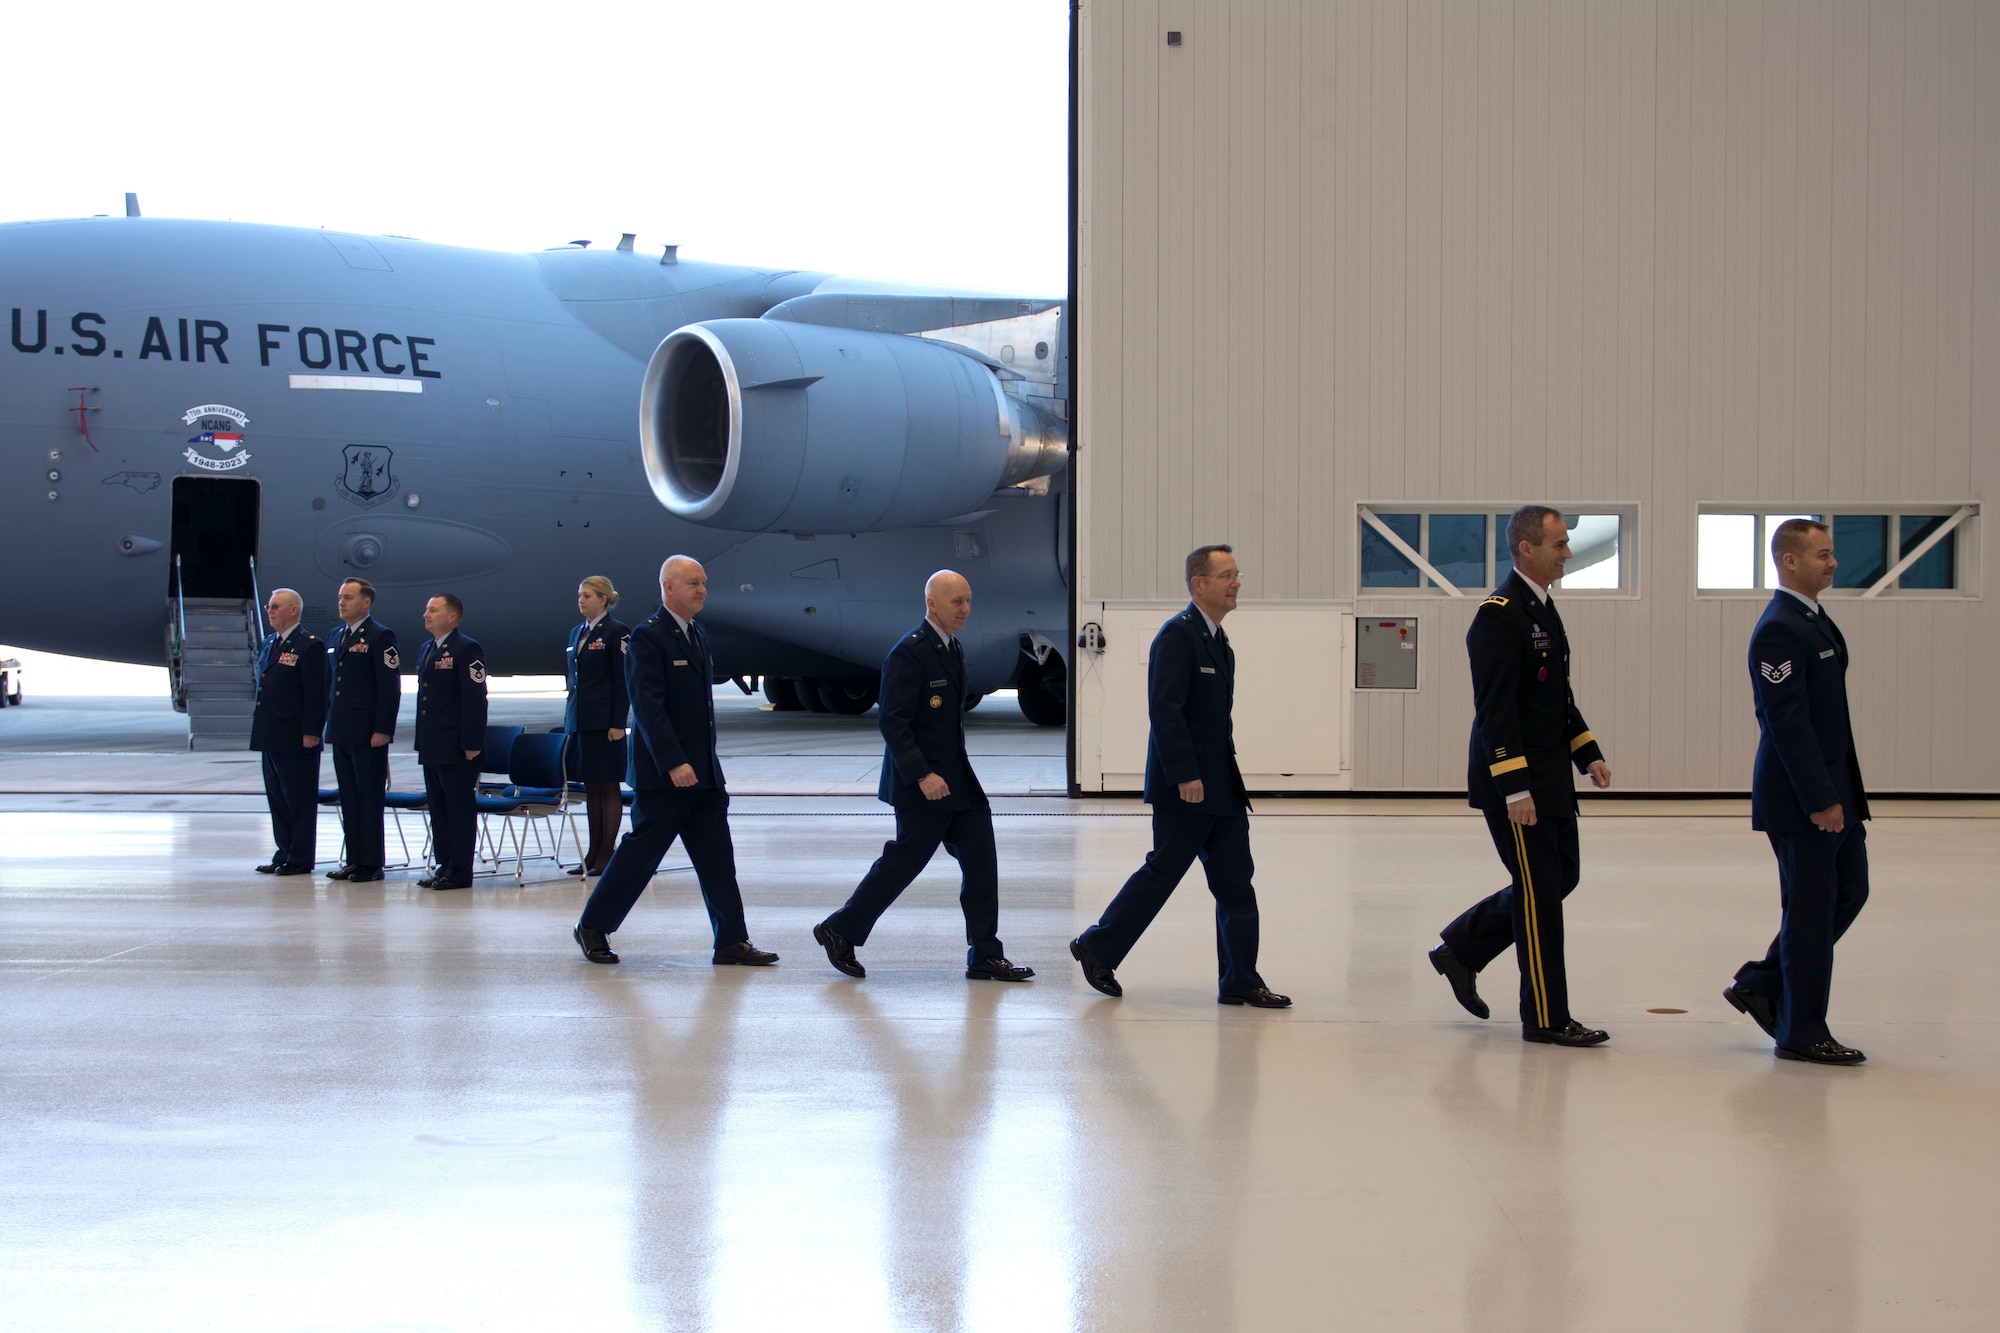 The official party is escorted out upon the conclusion of a ribbon-cutting ceremony held at the North Carolina Air National Guard Base.